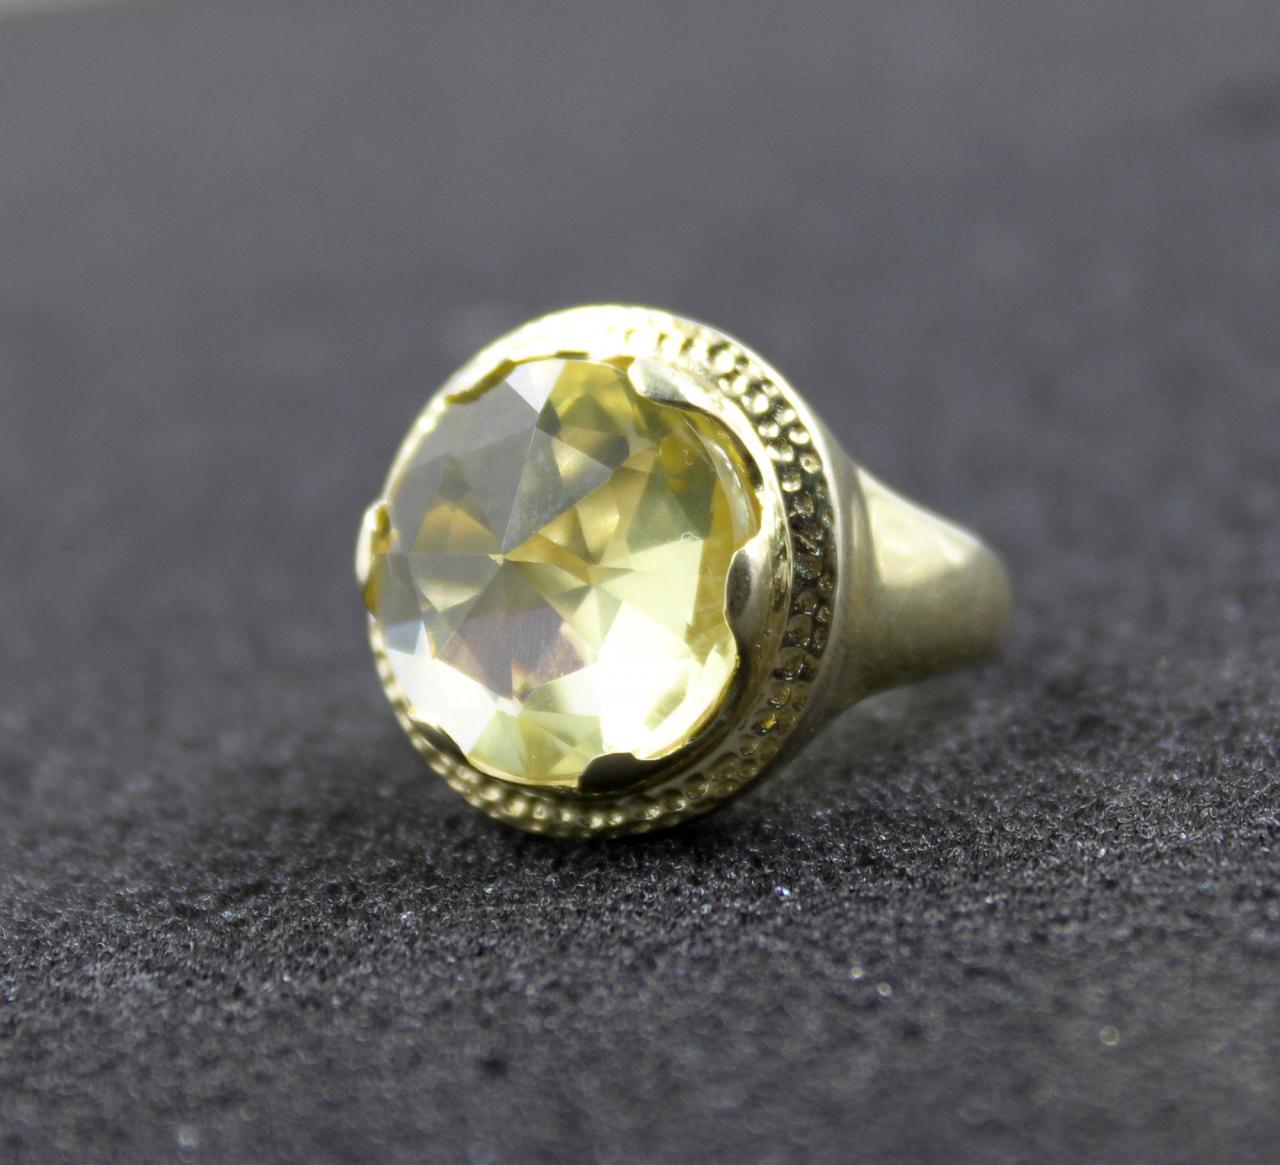 Sparkling Yellow Lemon Quartz Cocktail Ring,solid 925 Sterling Silver Jewelry,men's Ring,anniversary Gift,party Wear Ring,wedding